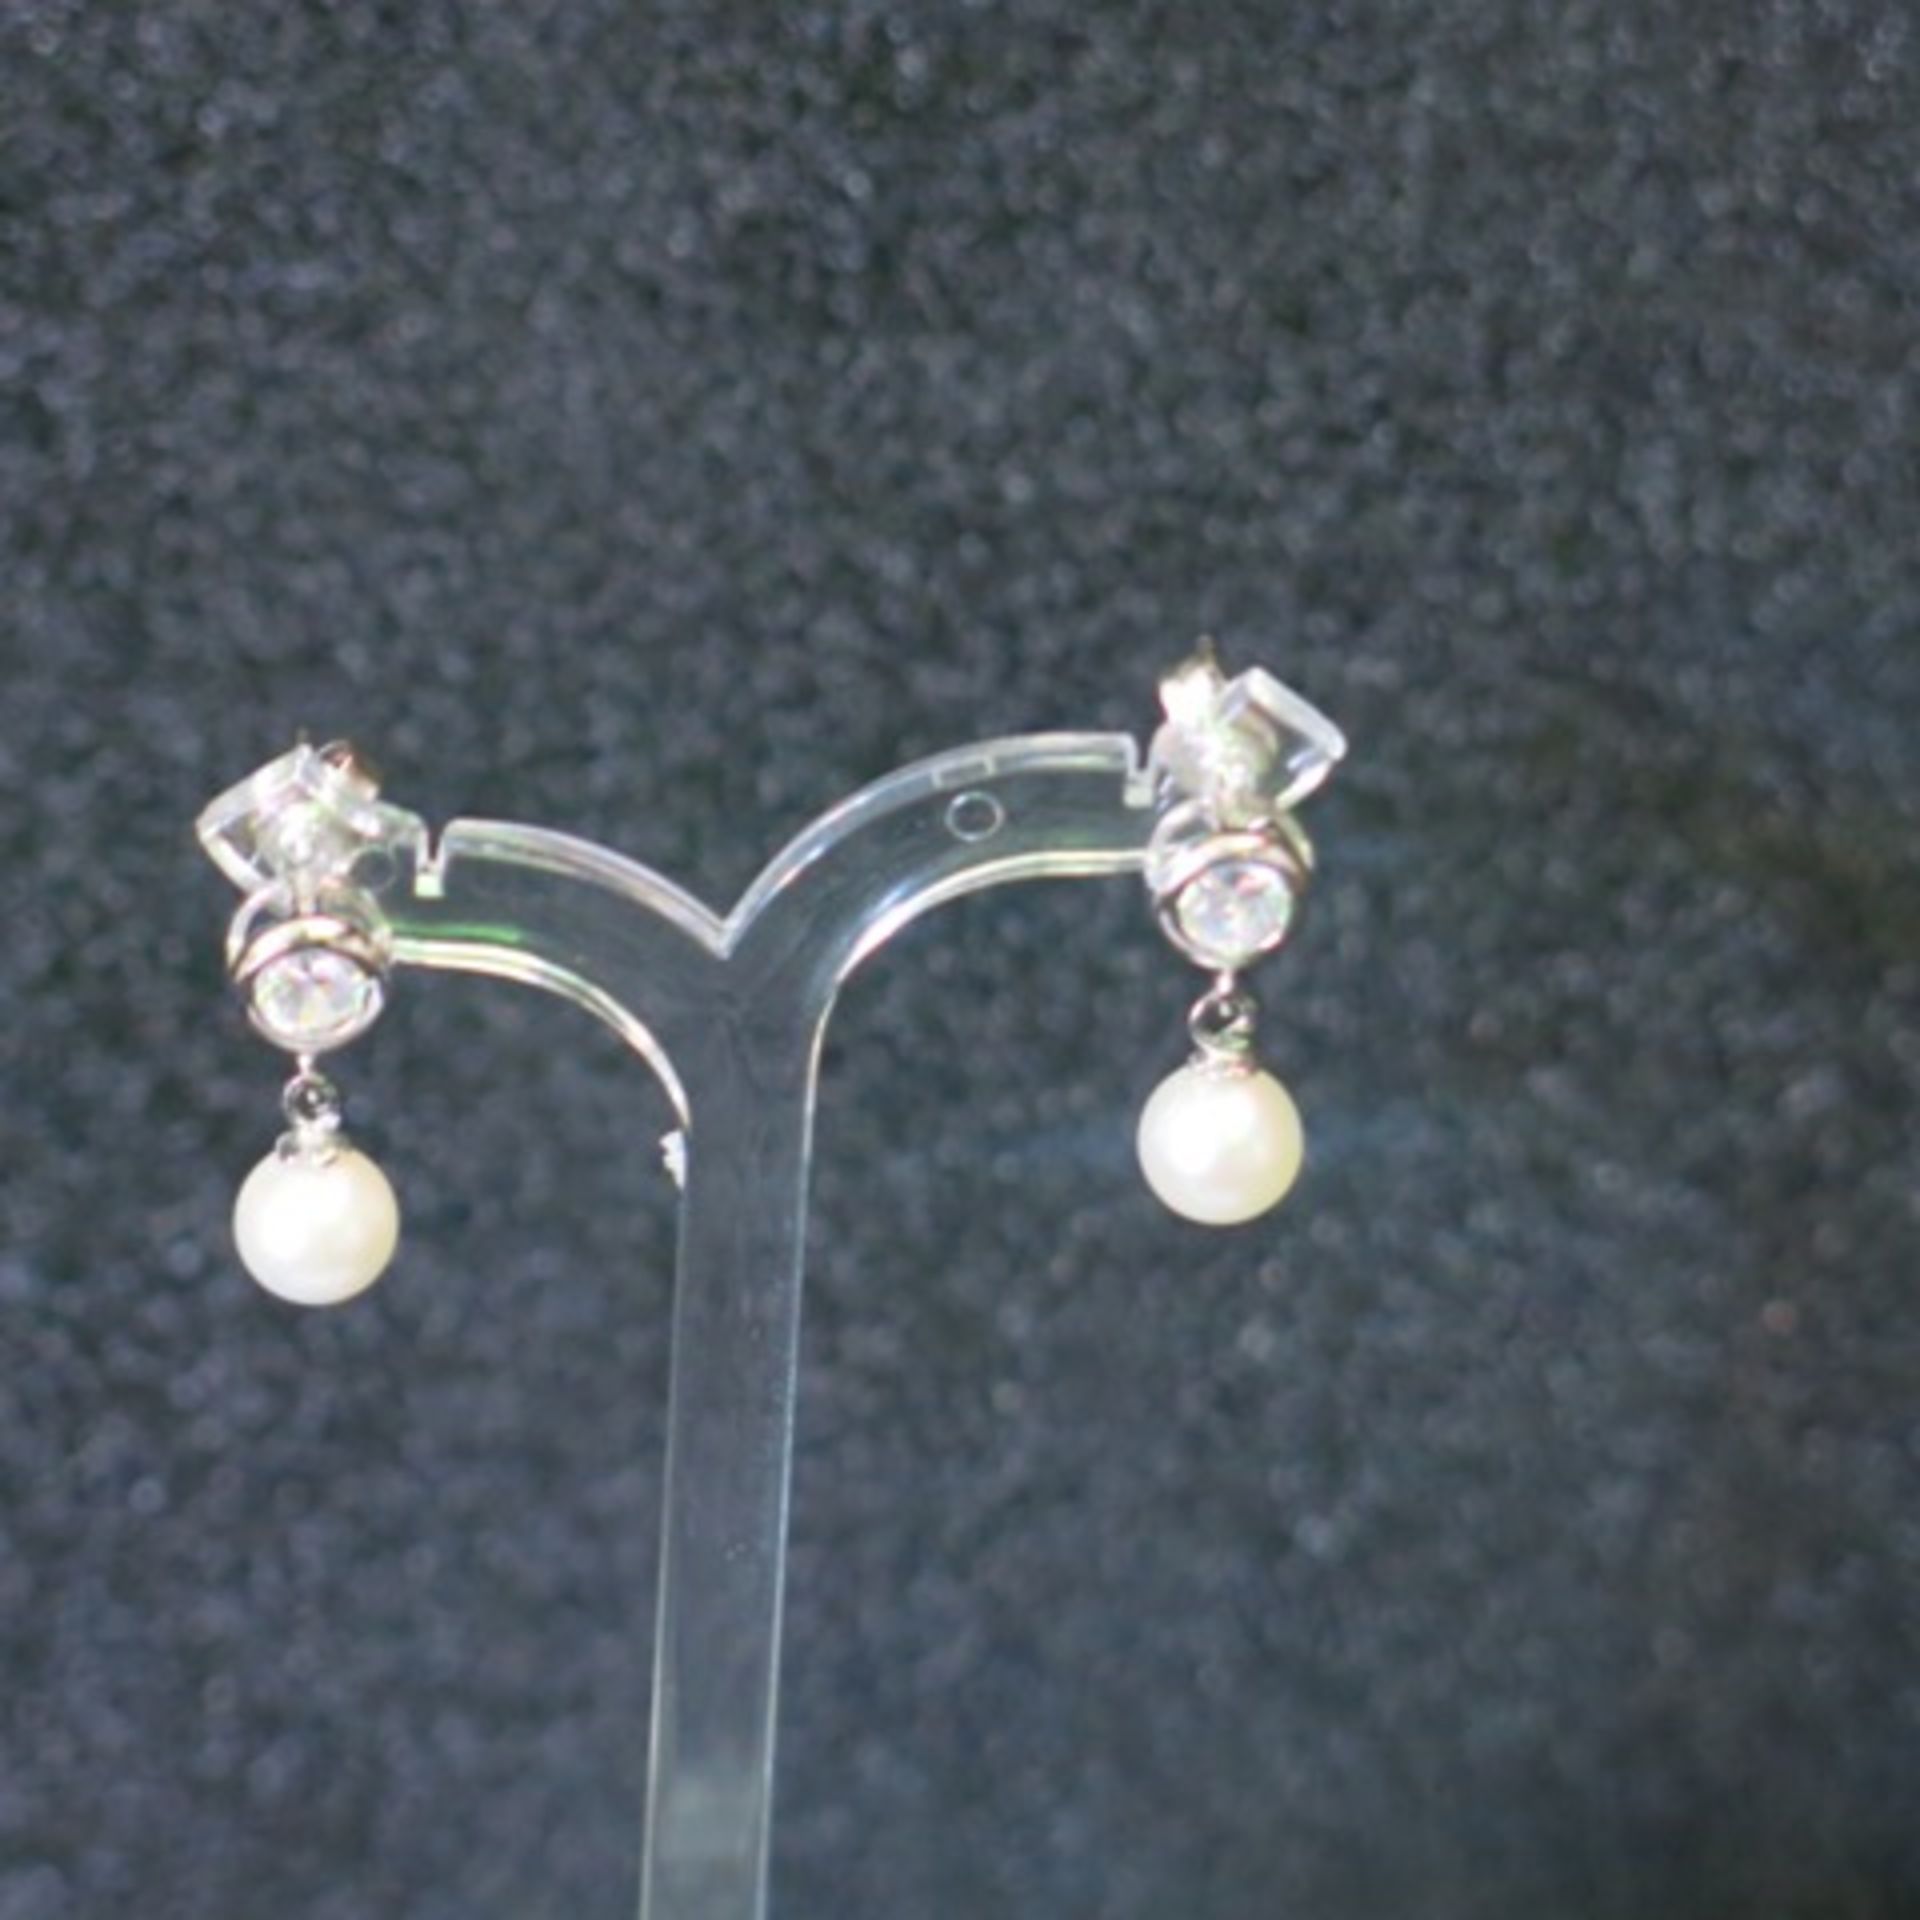 Pair of Pearl Drop Earrings with White Metal and Single Large Clear Stone. RRP £178.00 - Image 2 of 2